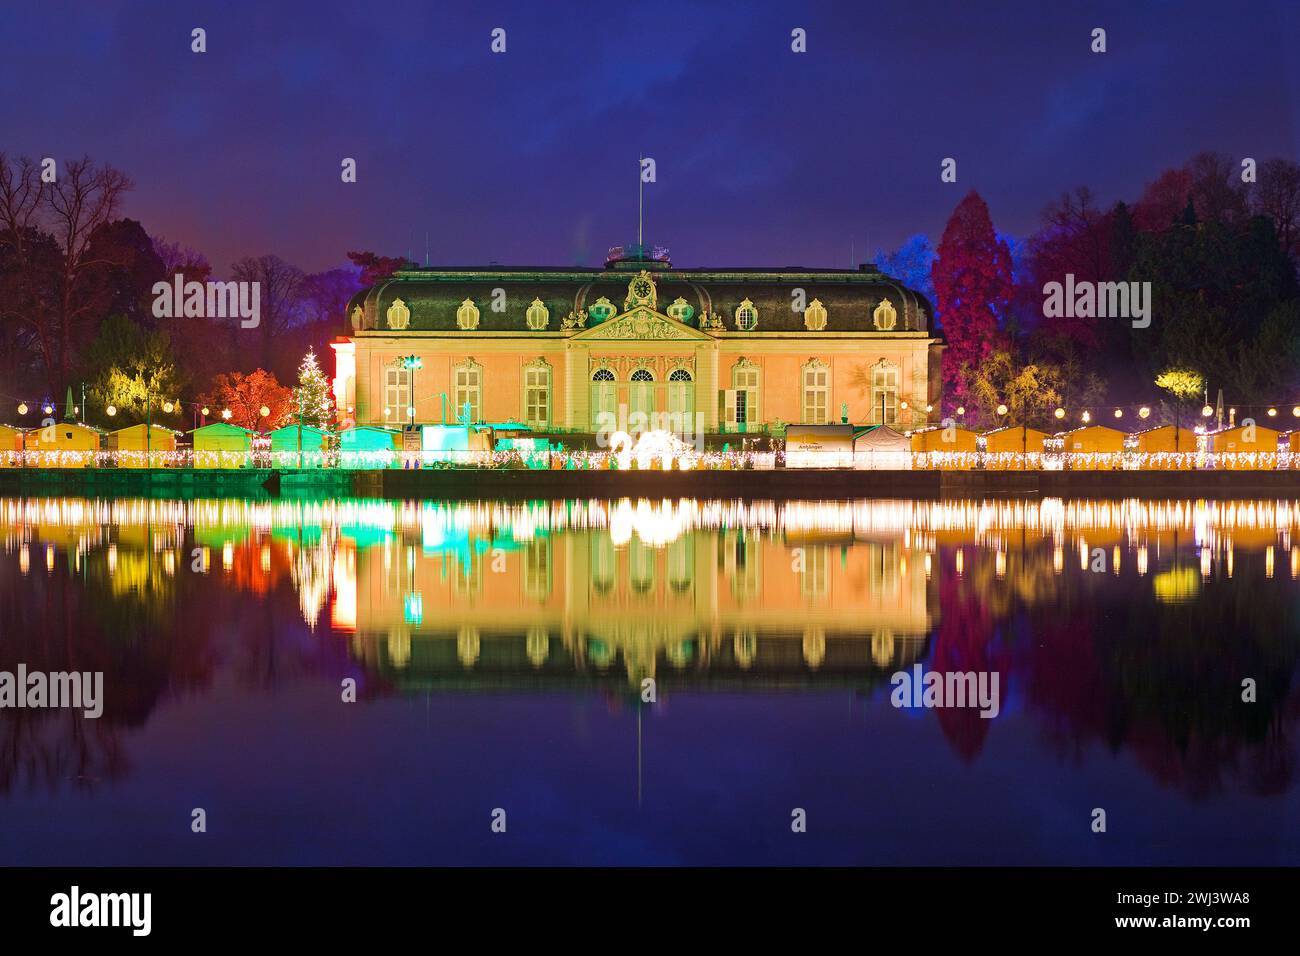 Illuminated Benrath Castle in the evening at Christmas Wonder World, Duesseldorf, Germany, Europe Stock Photo